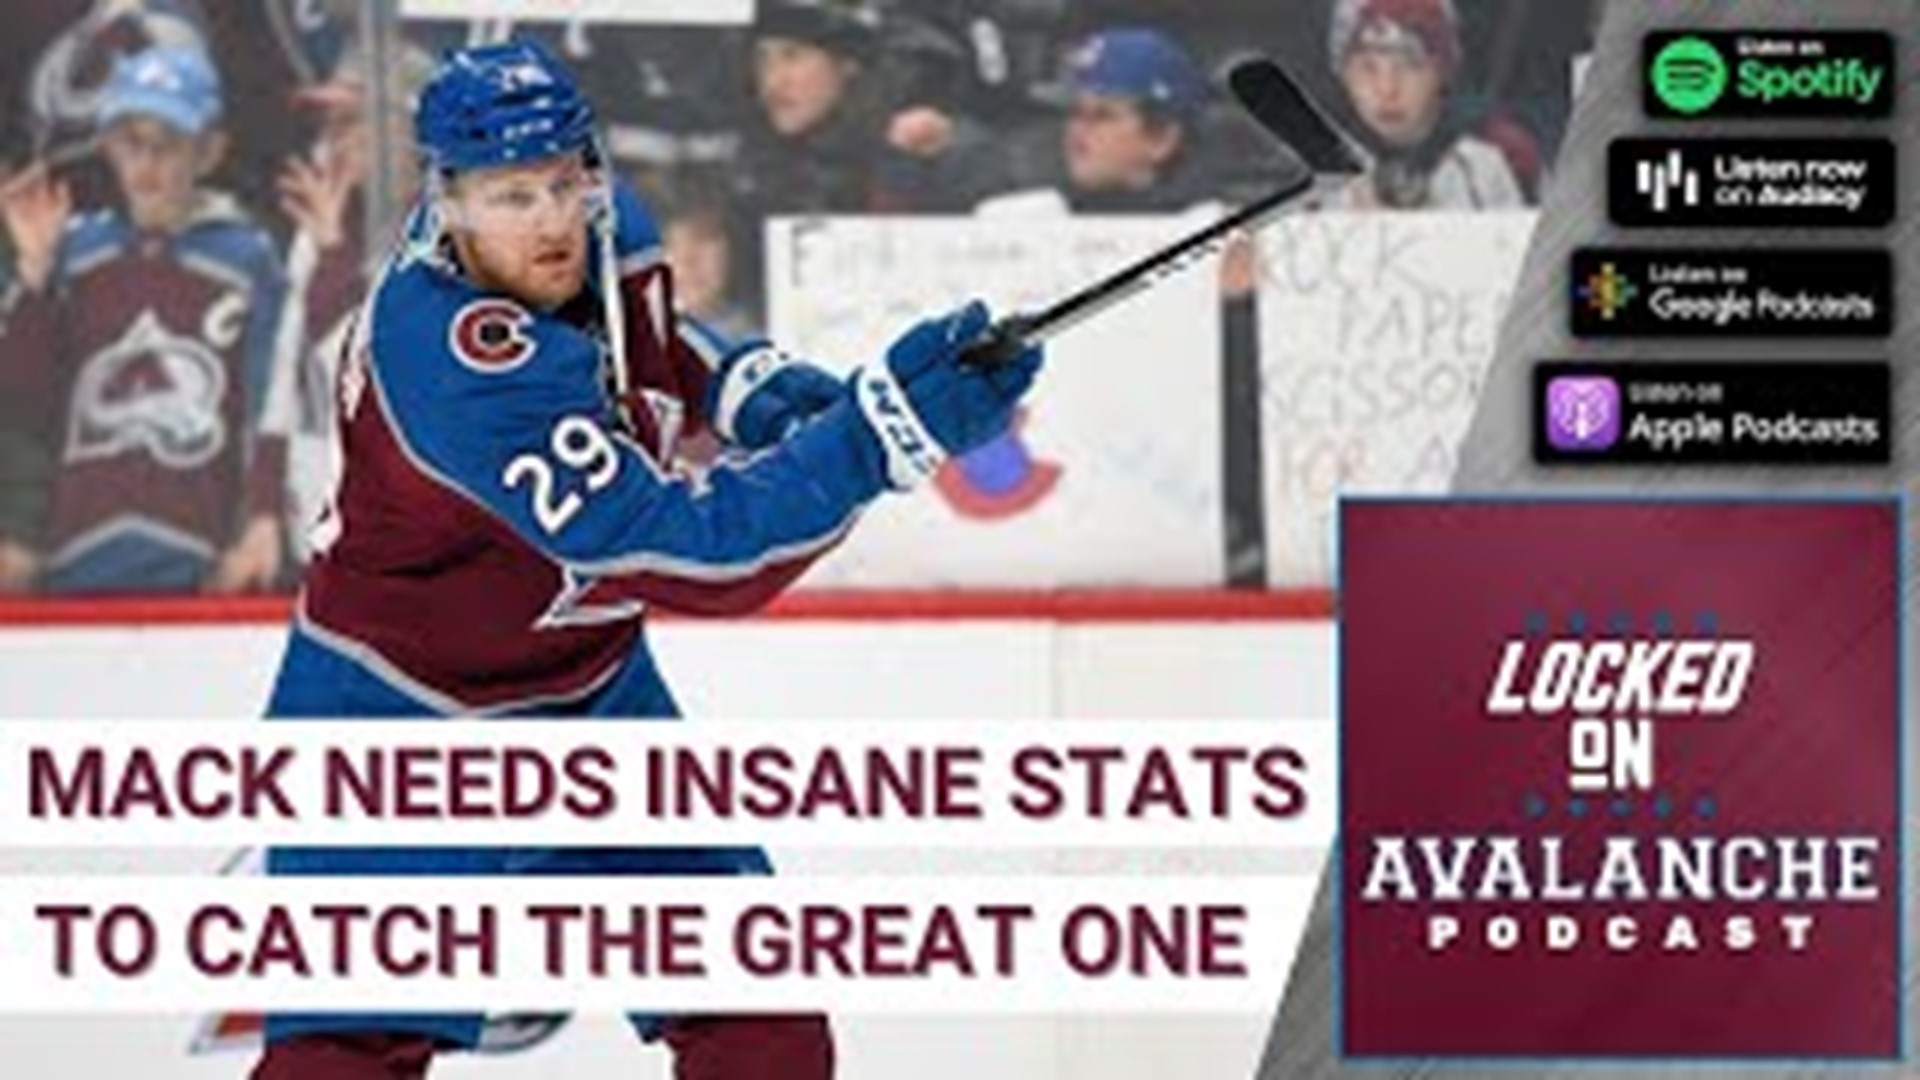 If Nathan MacKinnon played another 13 seasons which would take him to the age of 40, what would he need to average per year in certain categories to catch Gretzky?